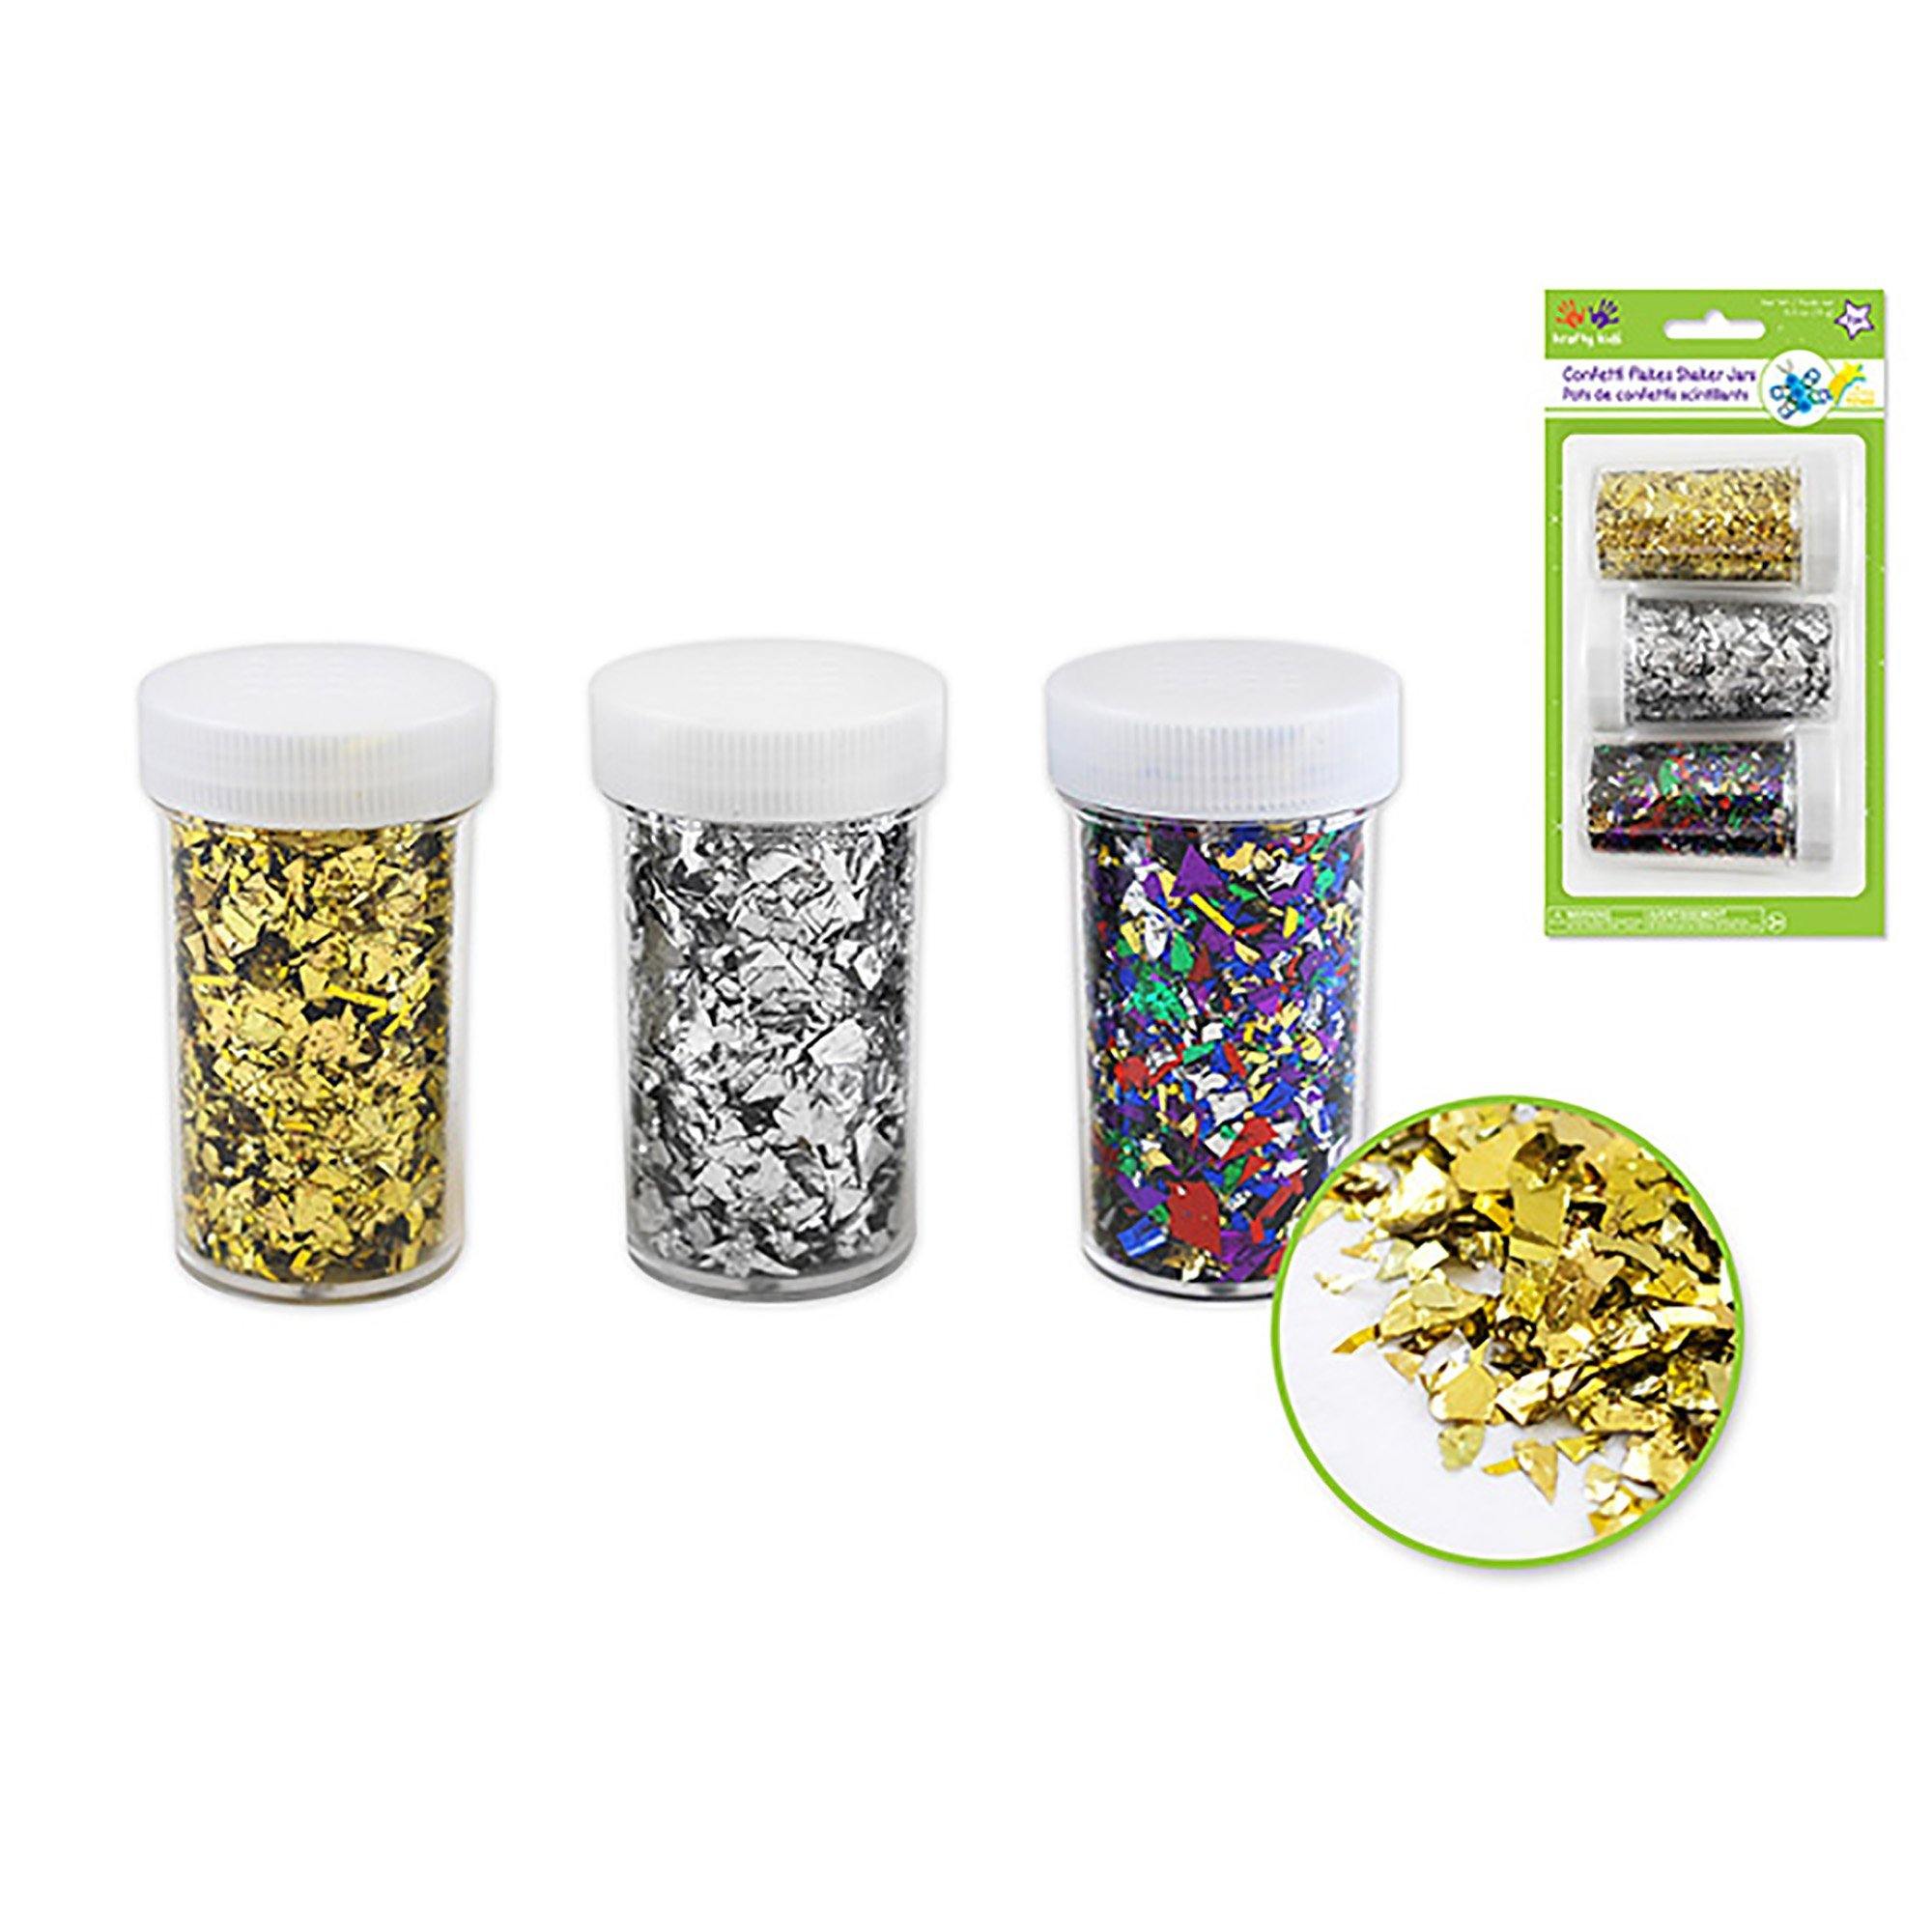 Gold/Silver/Multi Twinkle Town: 30G Confetti Flakes Shaker Jars - Dollar Max Dépôt